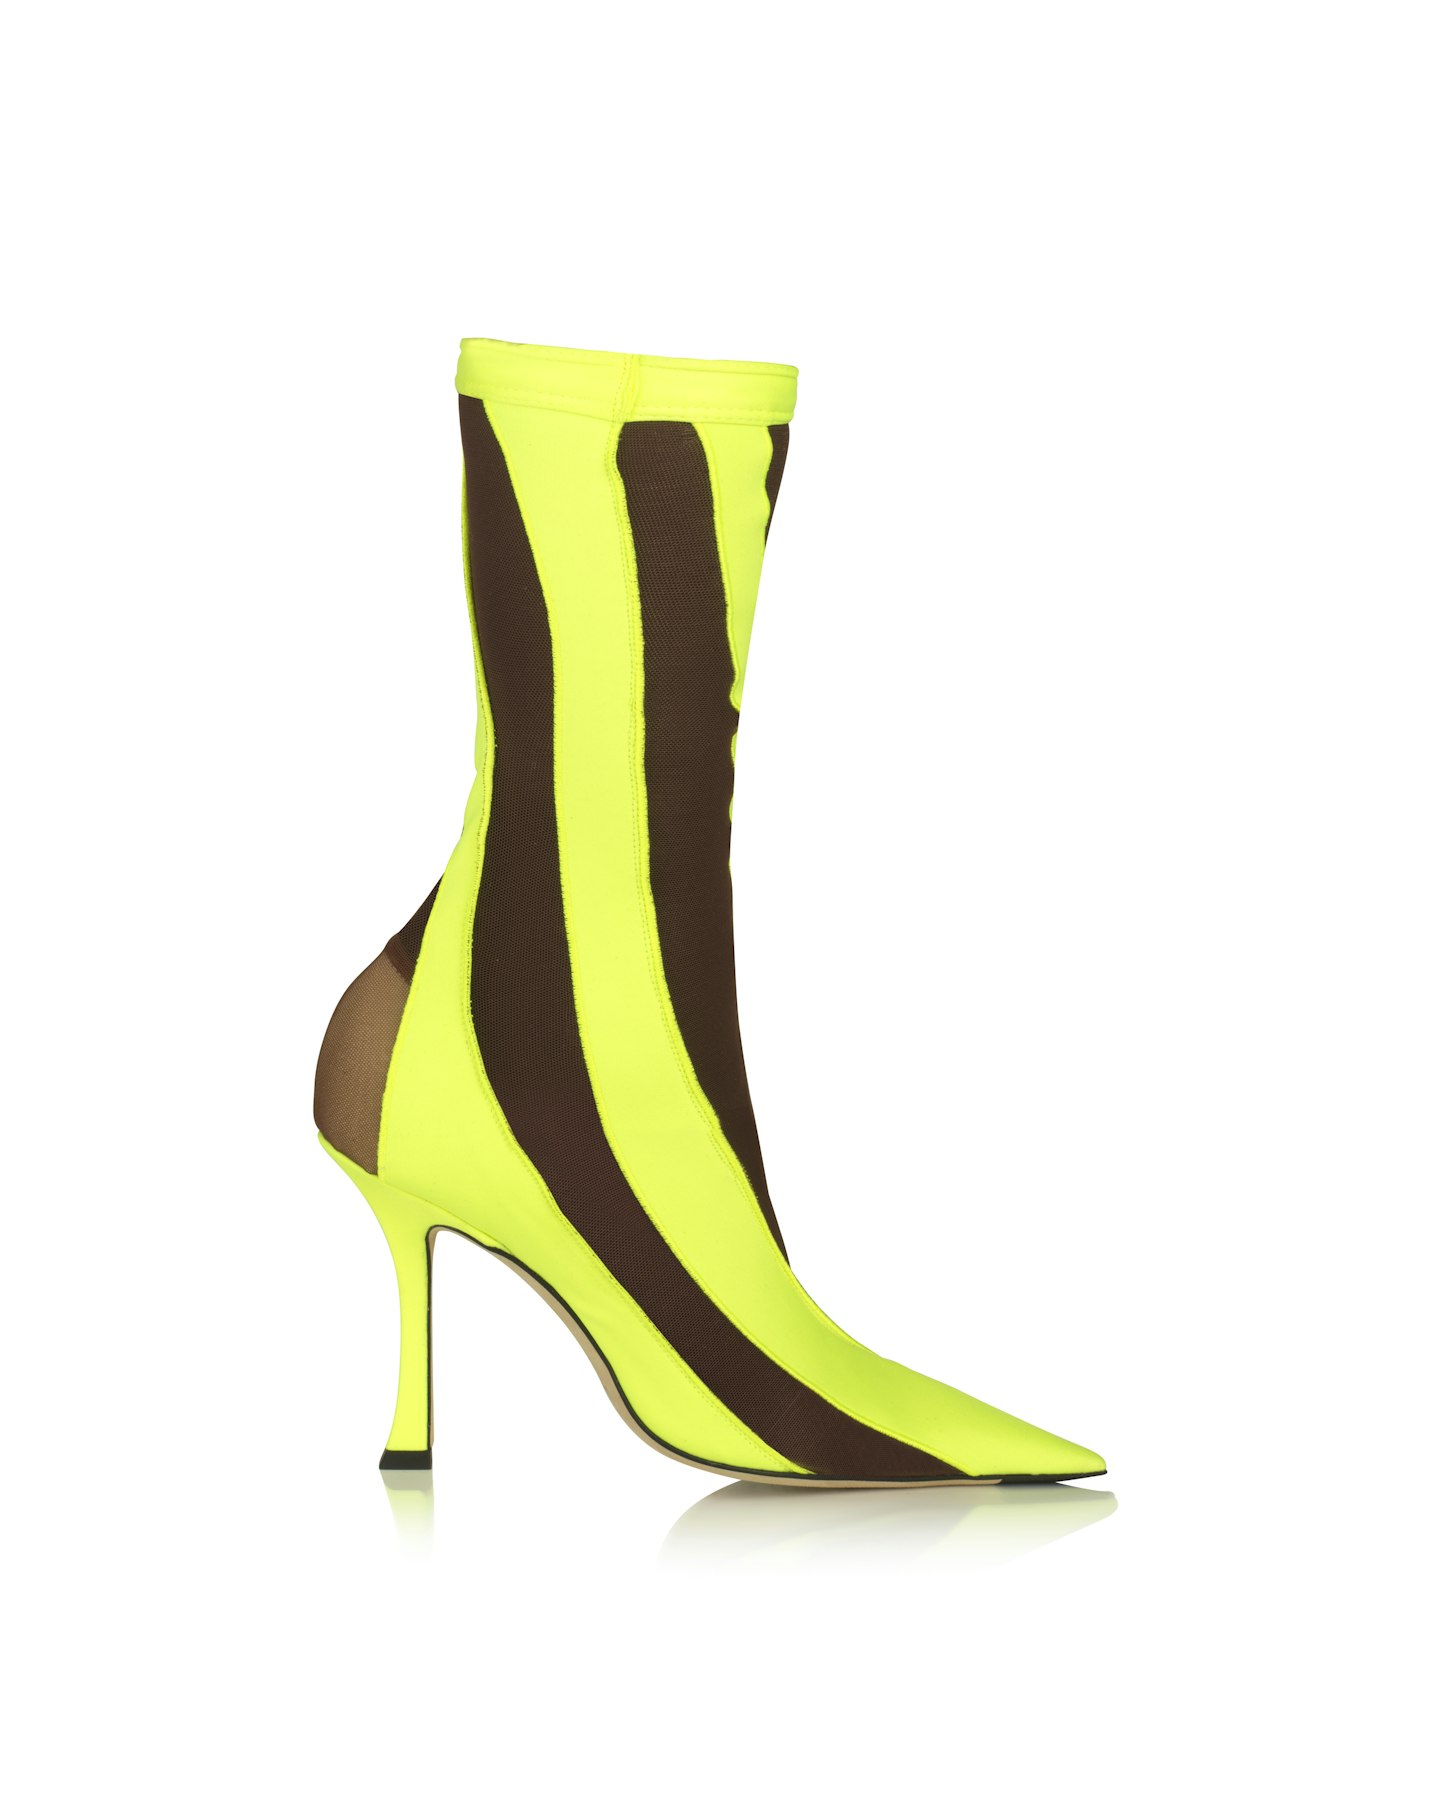 Jimmy Choo Mugler Neon Yellow and Dark Nude Sheer Spiral Stretch Fabric Sock Ankle Boots, £1,050